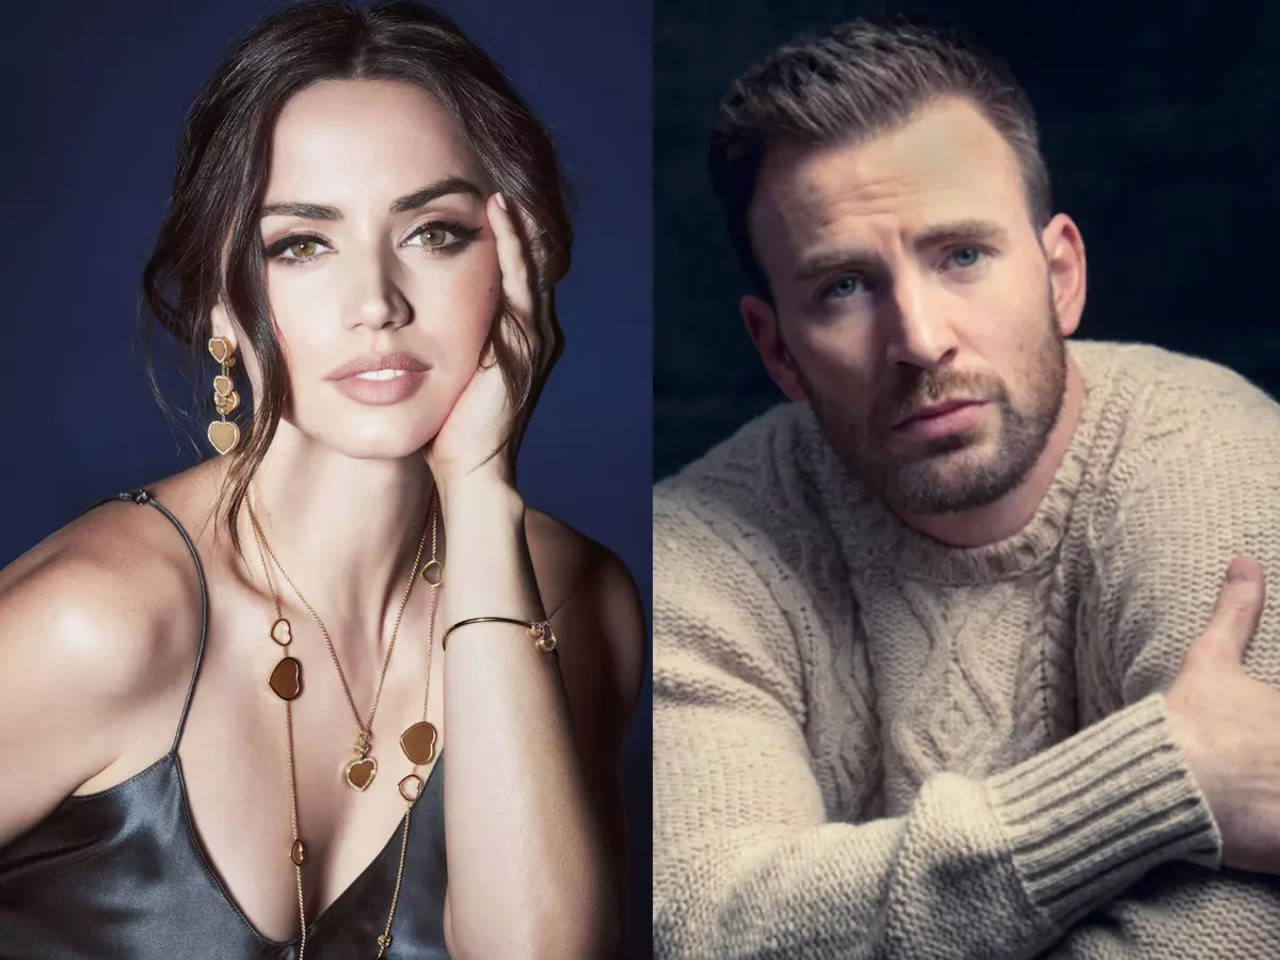 Ana de Armas replaces Scarlett Johansson to reunite with Chris Evans for ' Ghosted' and fans can't keep calm